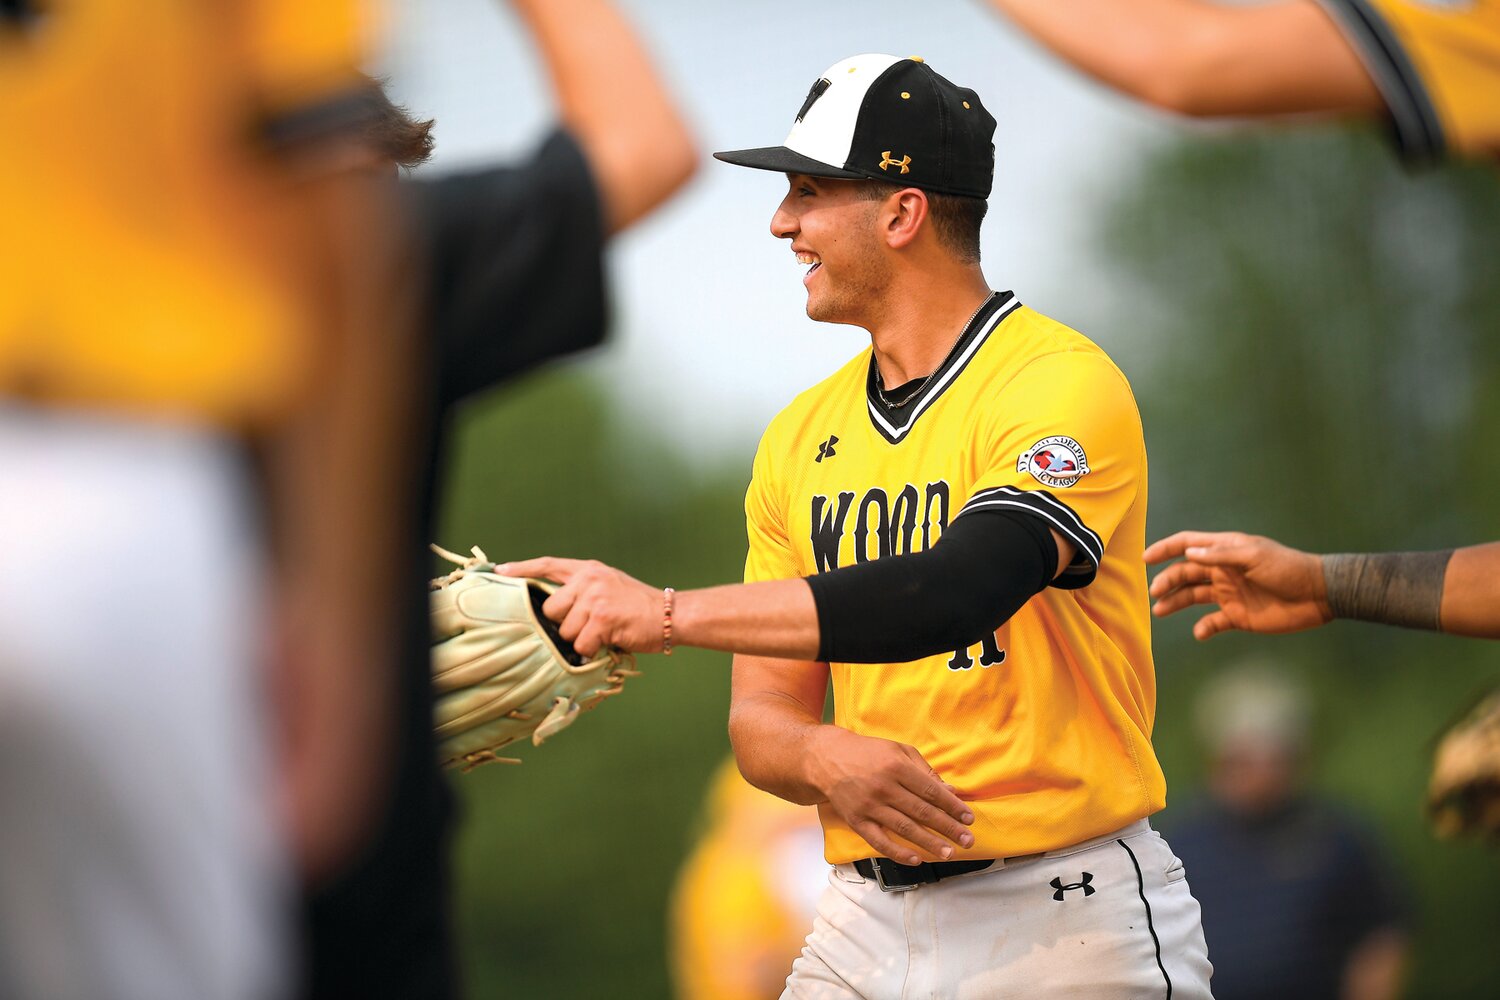 Archbishop Wood pitcher Joey Gale is congratulated after ending the second inning with a strikeout during Monday's PIAA opener against Pope John Paull II.